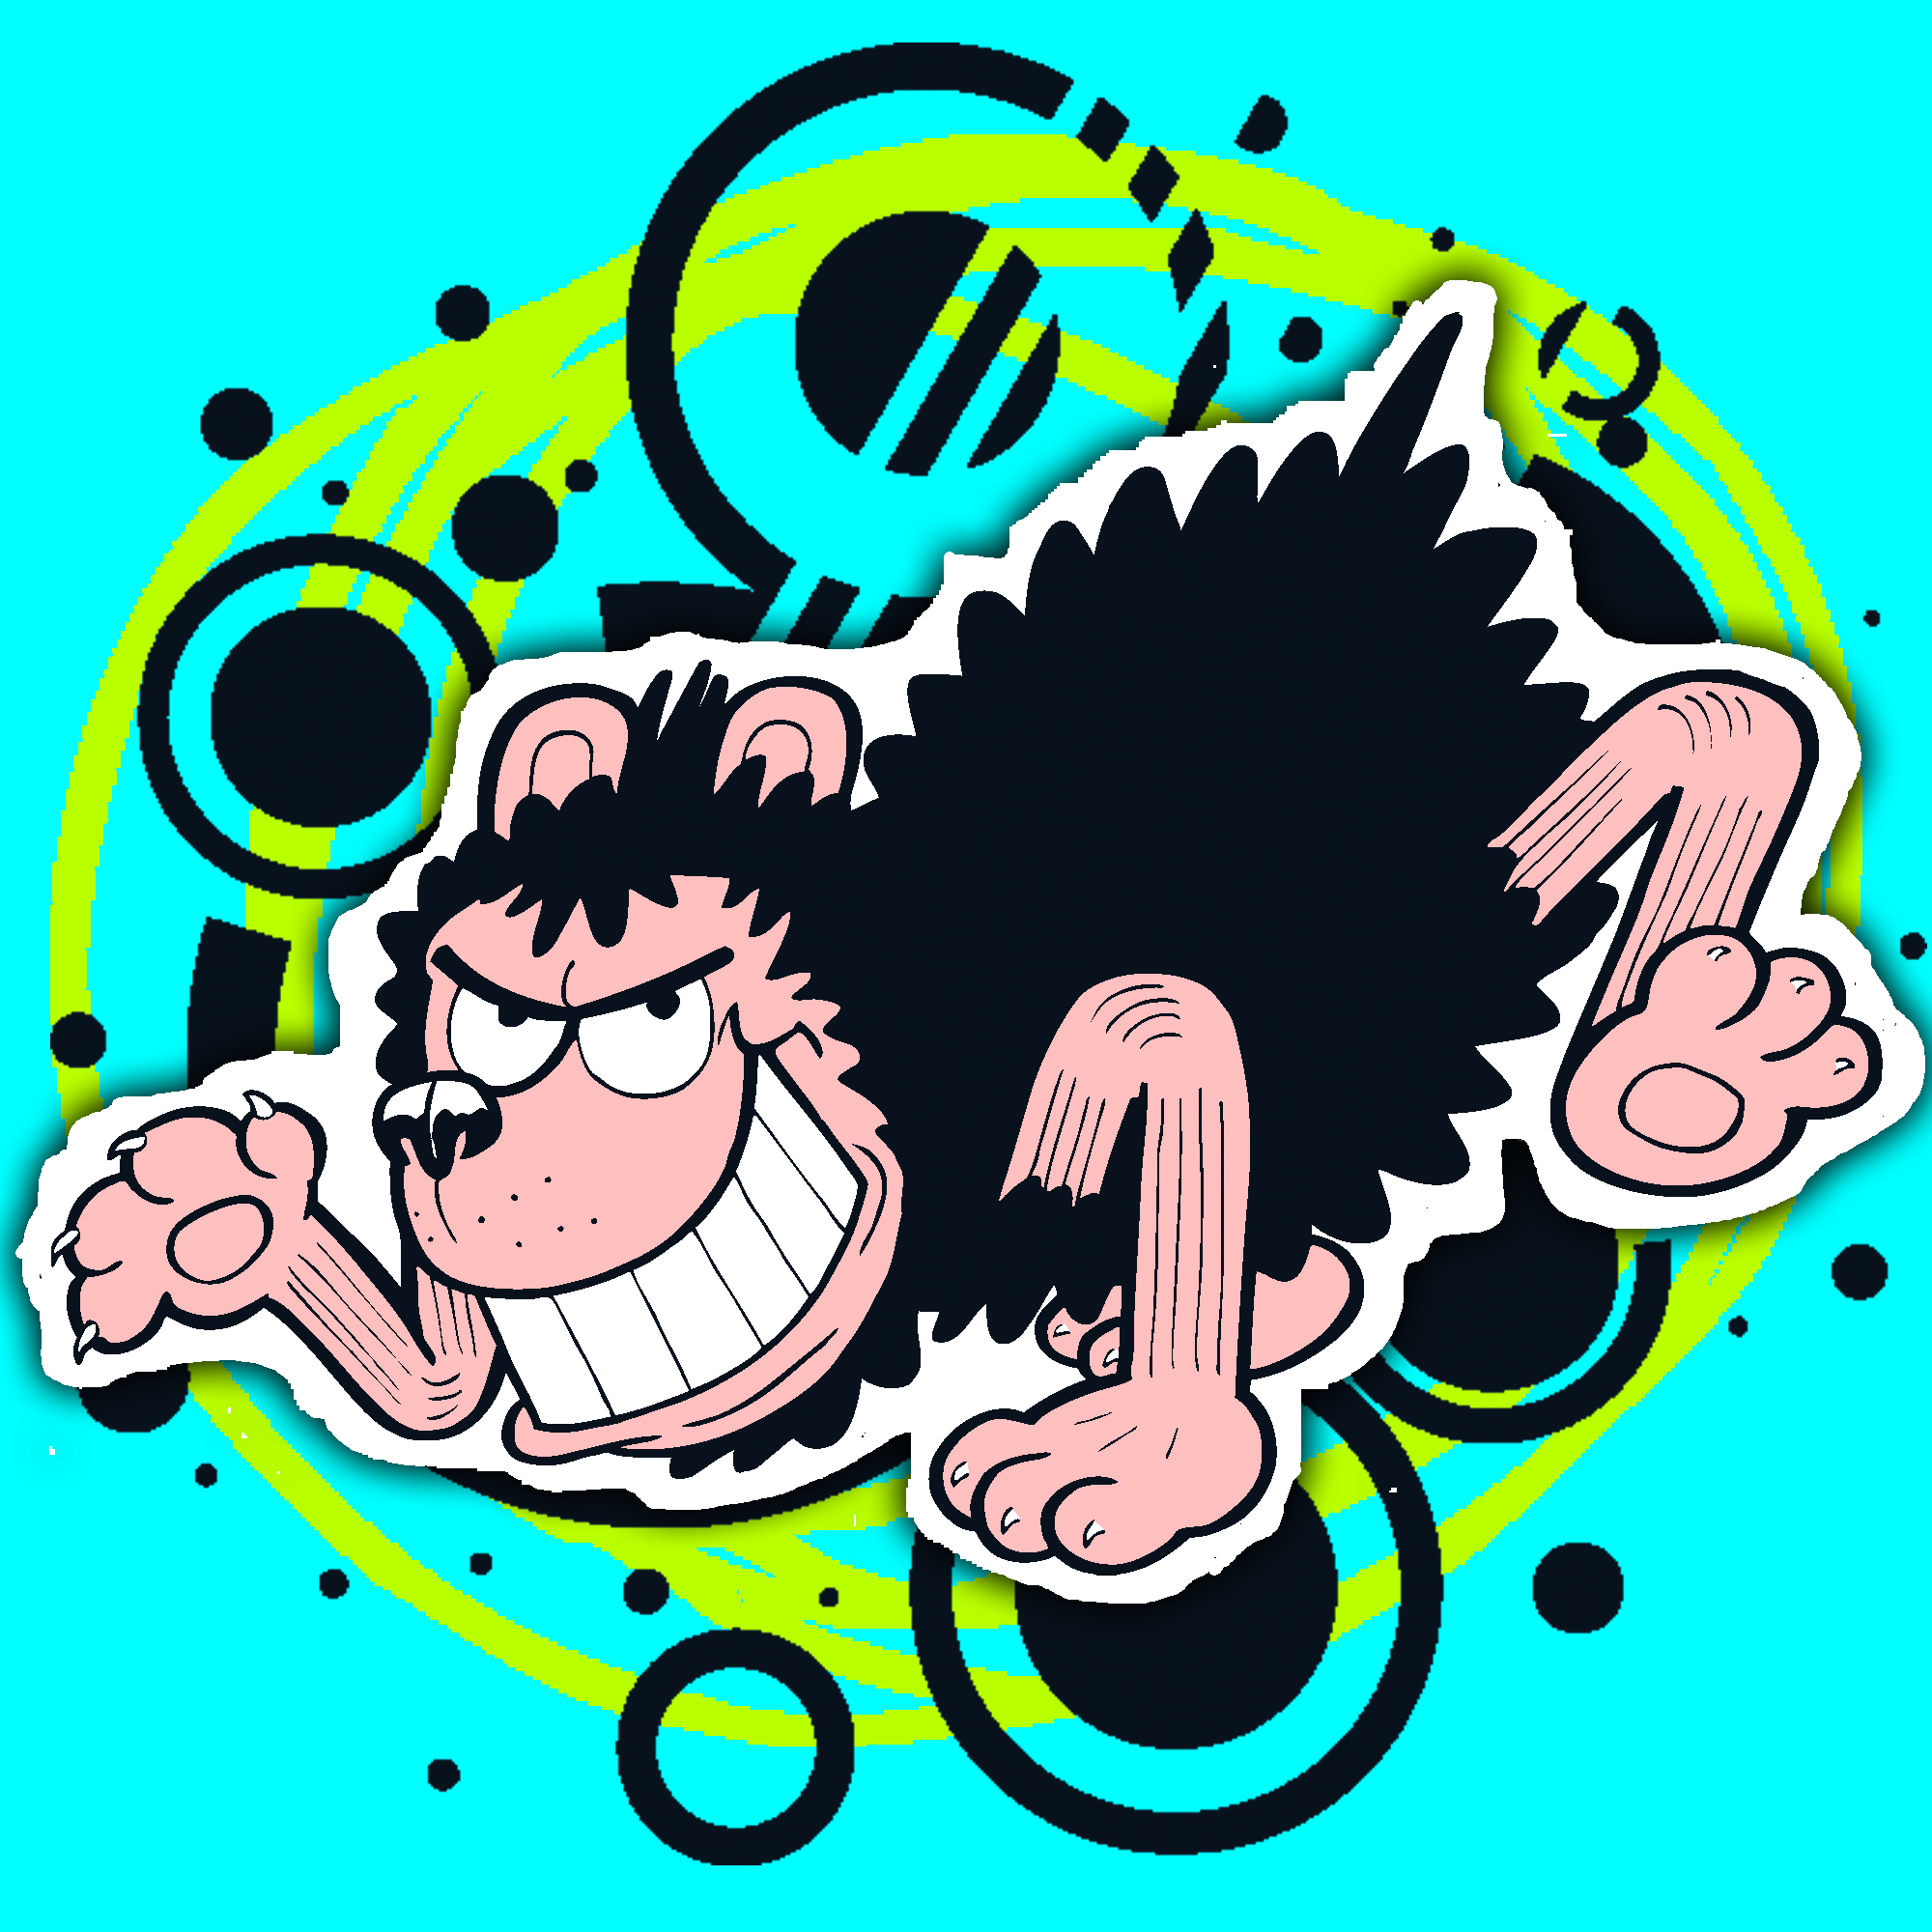 Gnasher from Beano - Dennis the Menace